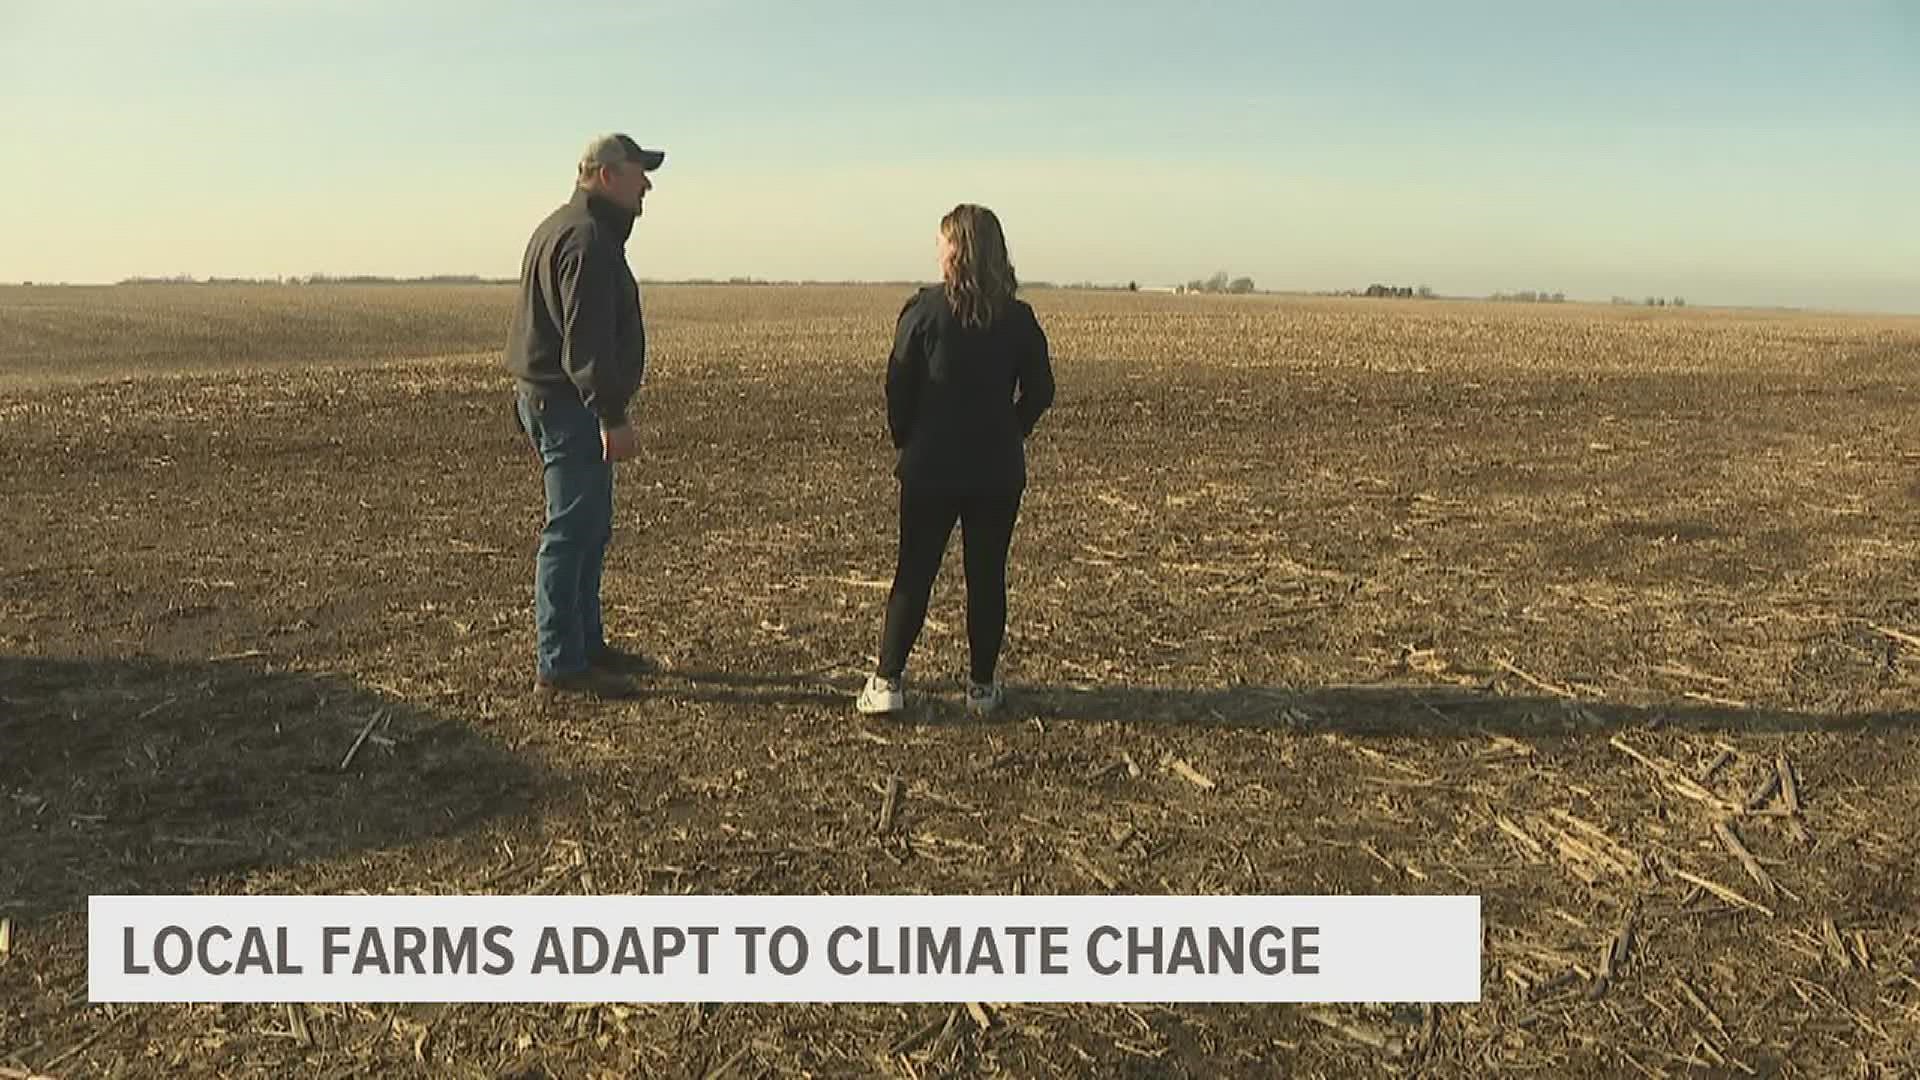 Some farmers have had to make adjustments for growing crops due to floods, heavy winds and other climate factors.